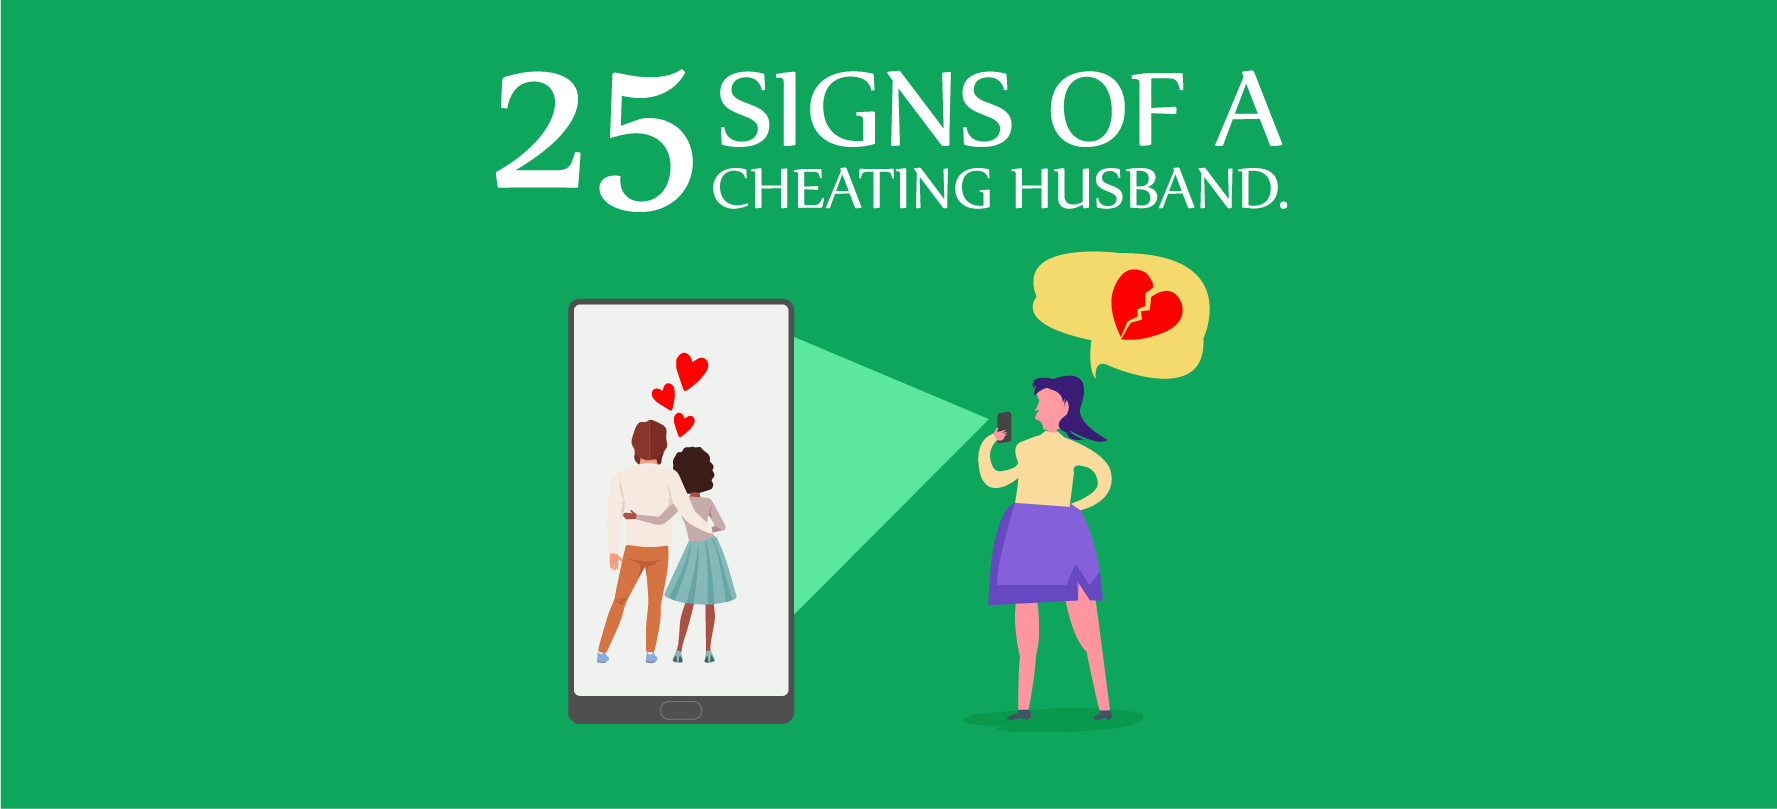 25 Signs of A Cheating Husband